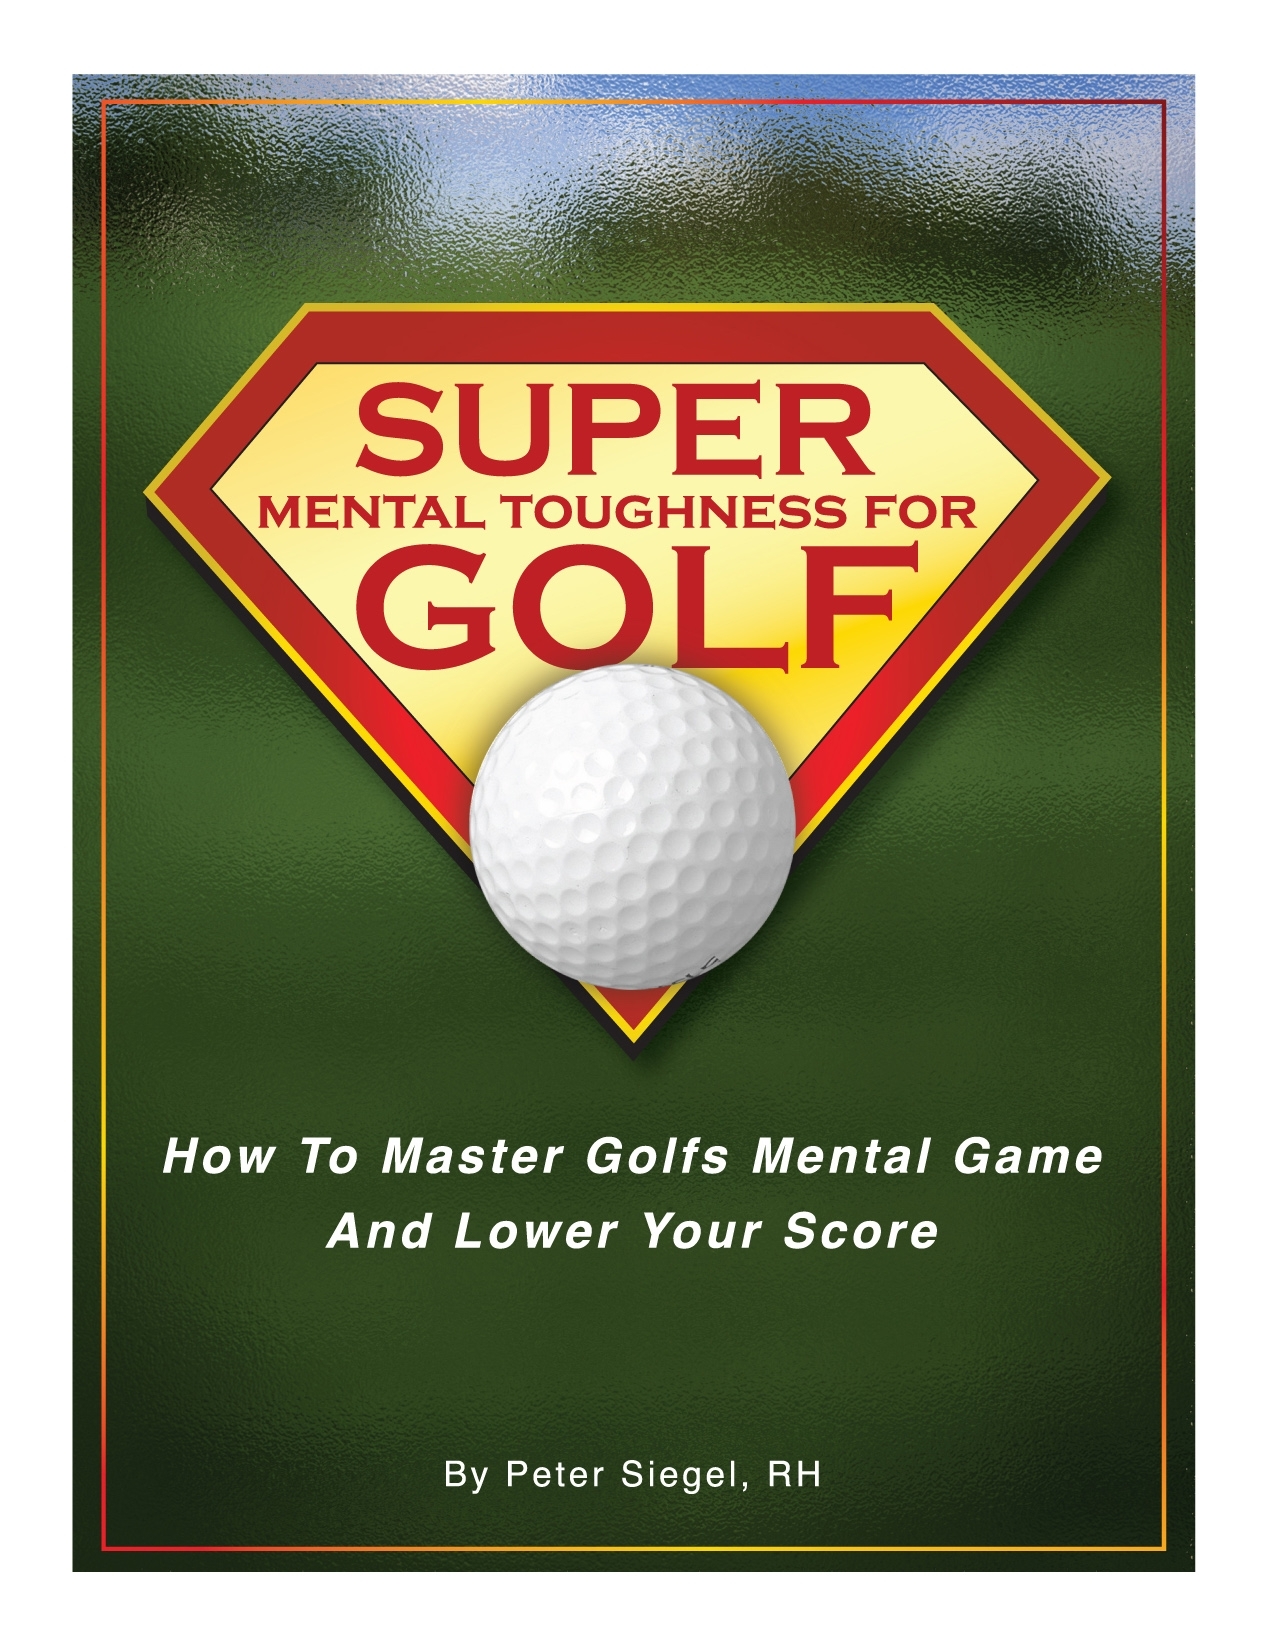 Super mental toughnes for golf sports hypnotherapy cd and book